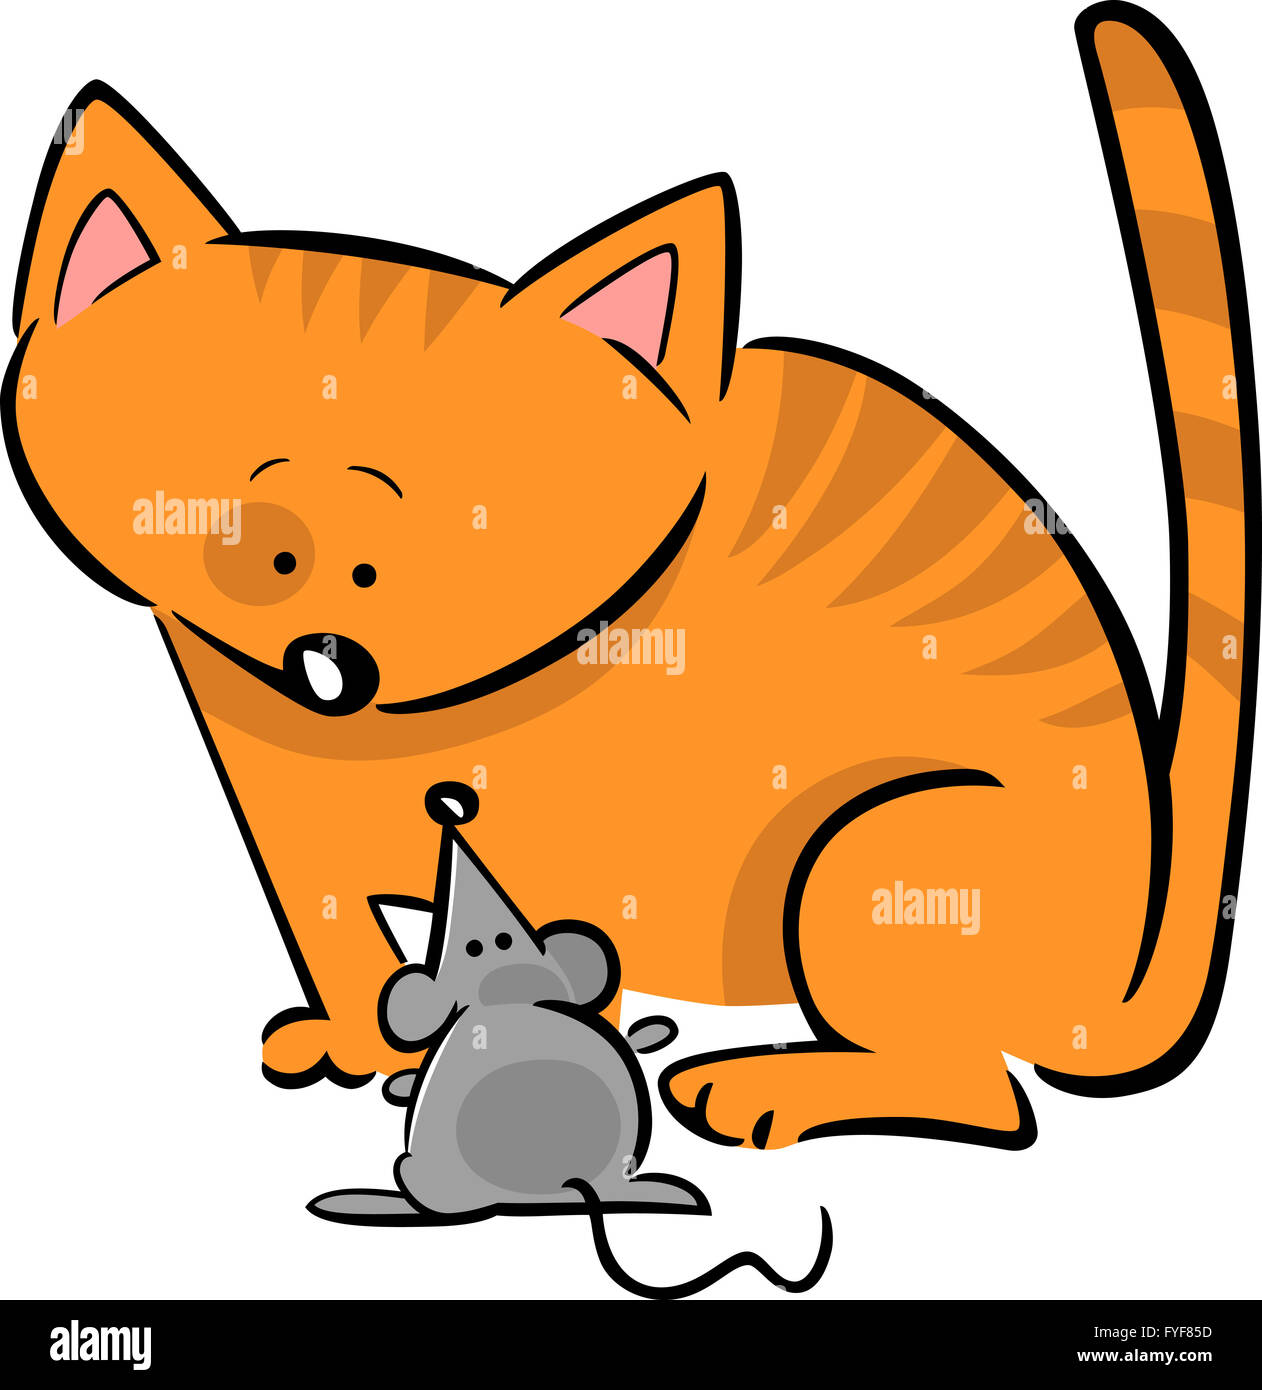 cartoon doodle of cat and mouse Stock Photo - Alamy